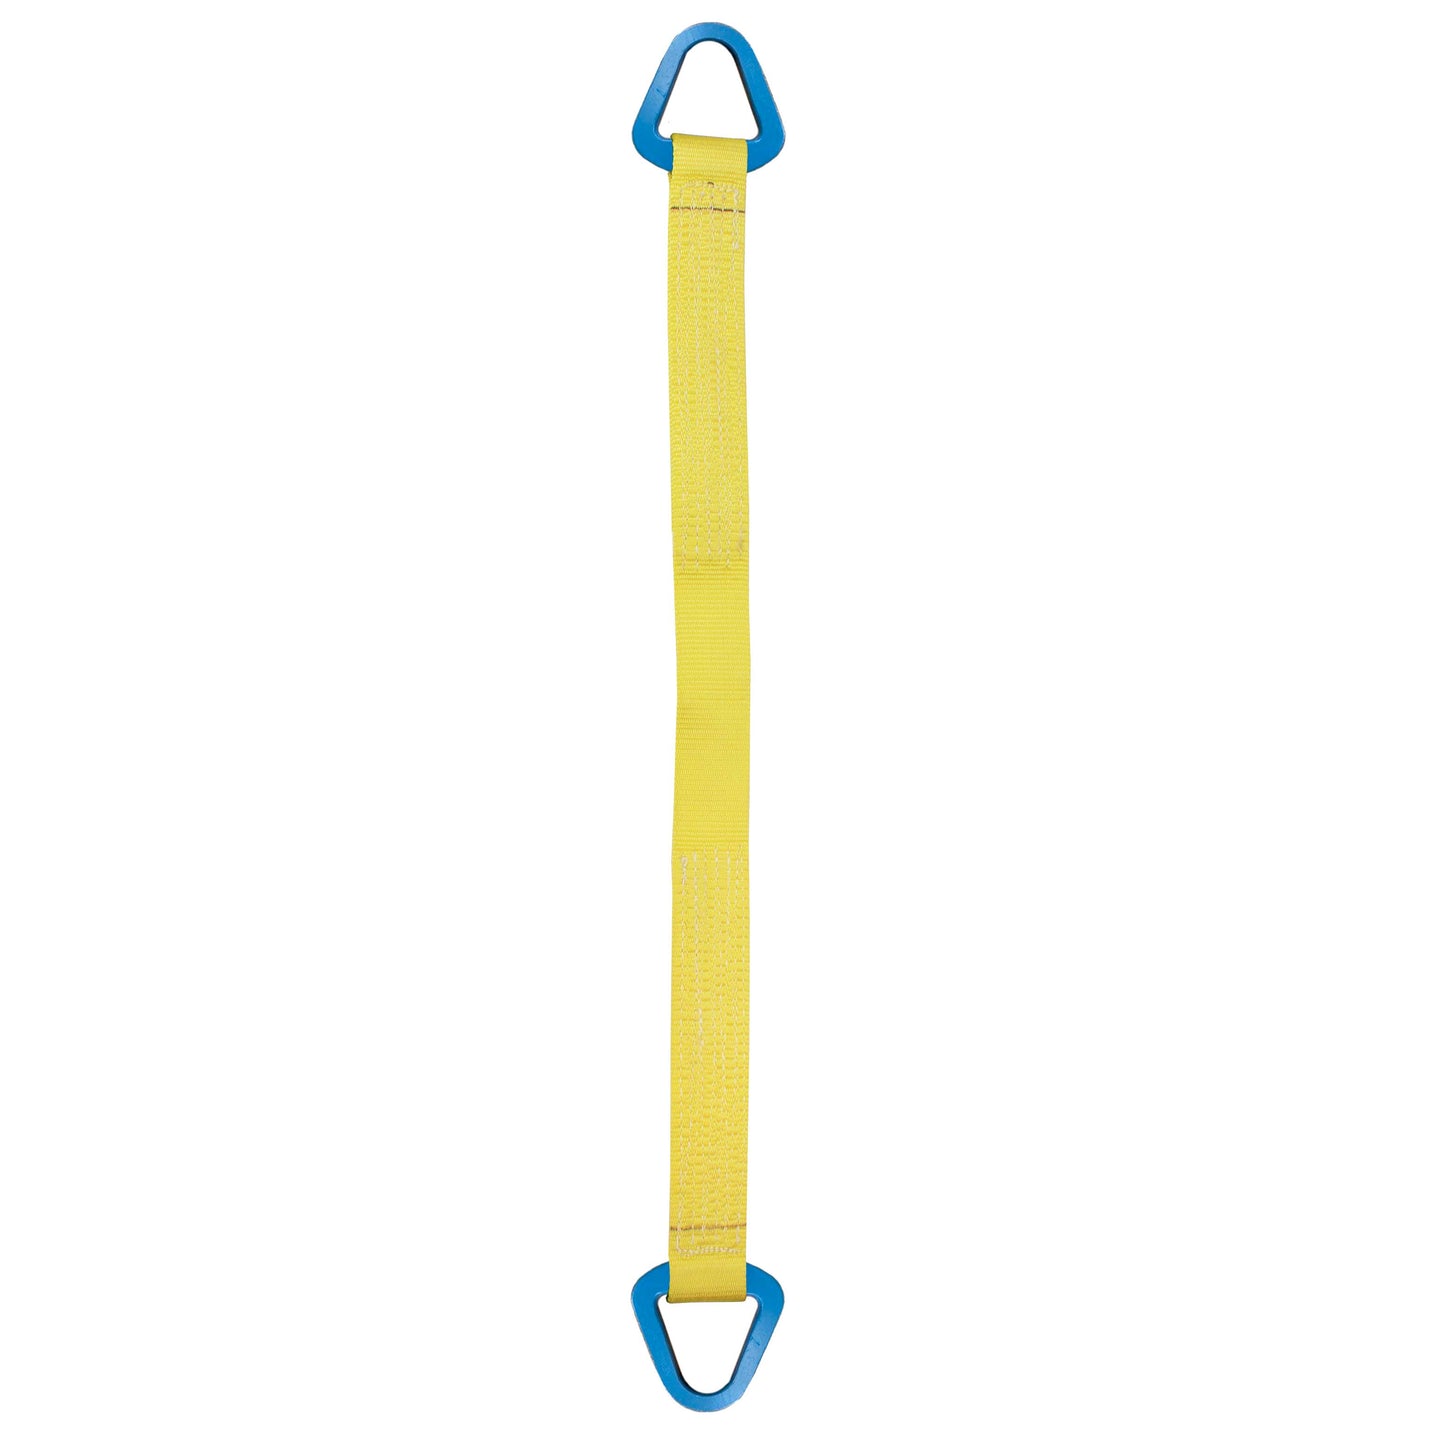 Nylon Lifting Sling Triangle 2 inch x 8 foot 2ply image 1 of 2